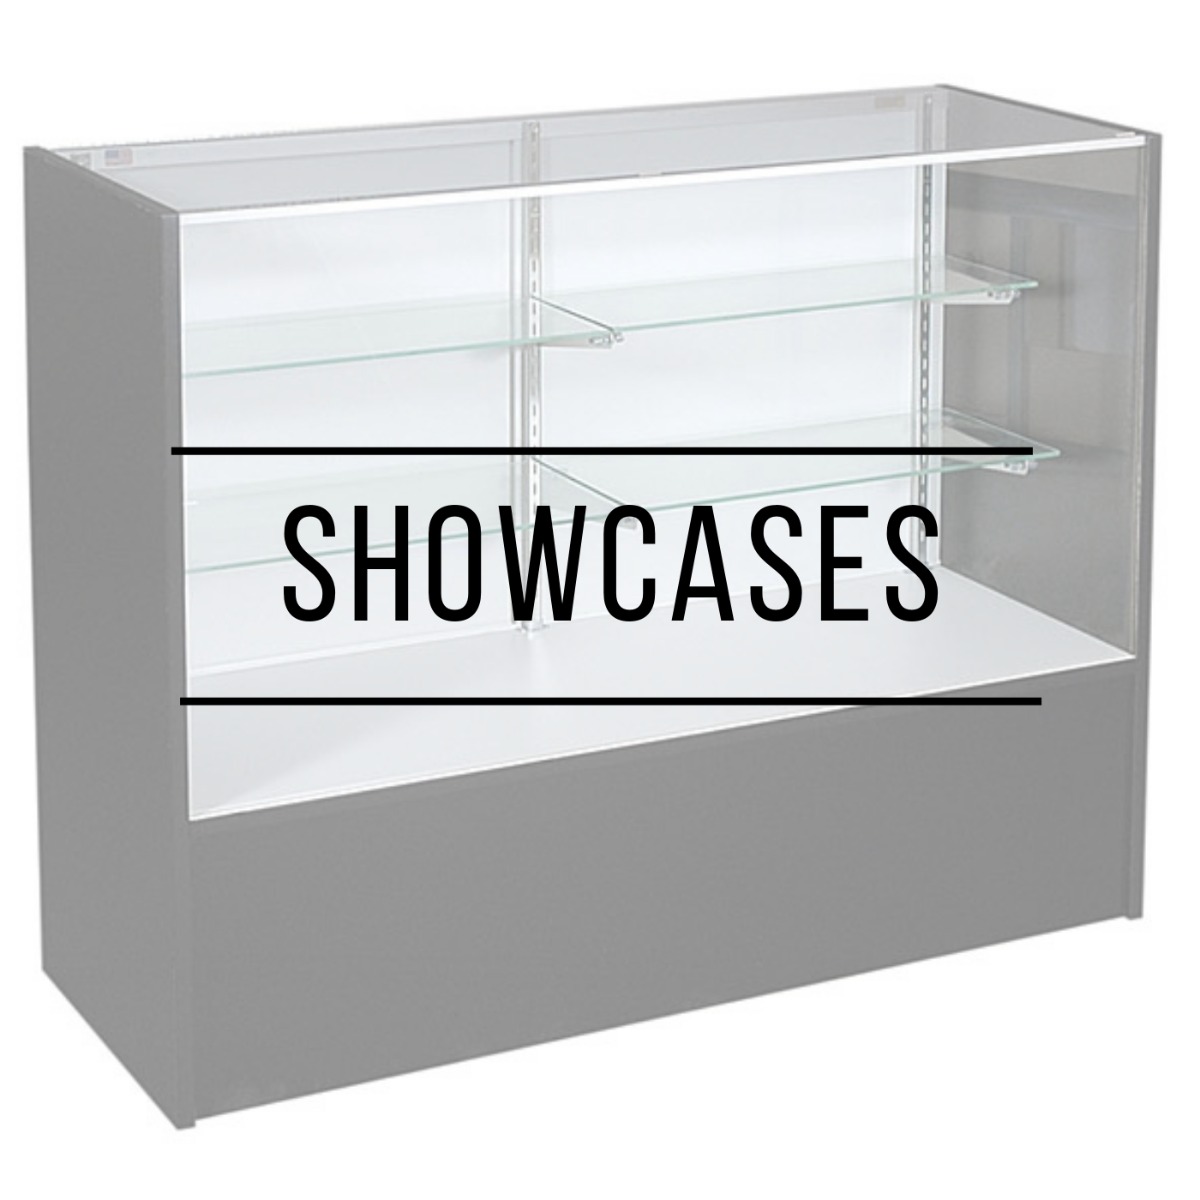 Showcases from small, medium, and tall display your Hawaii products.